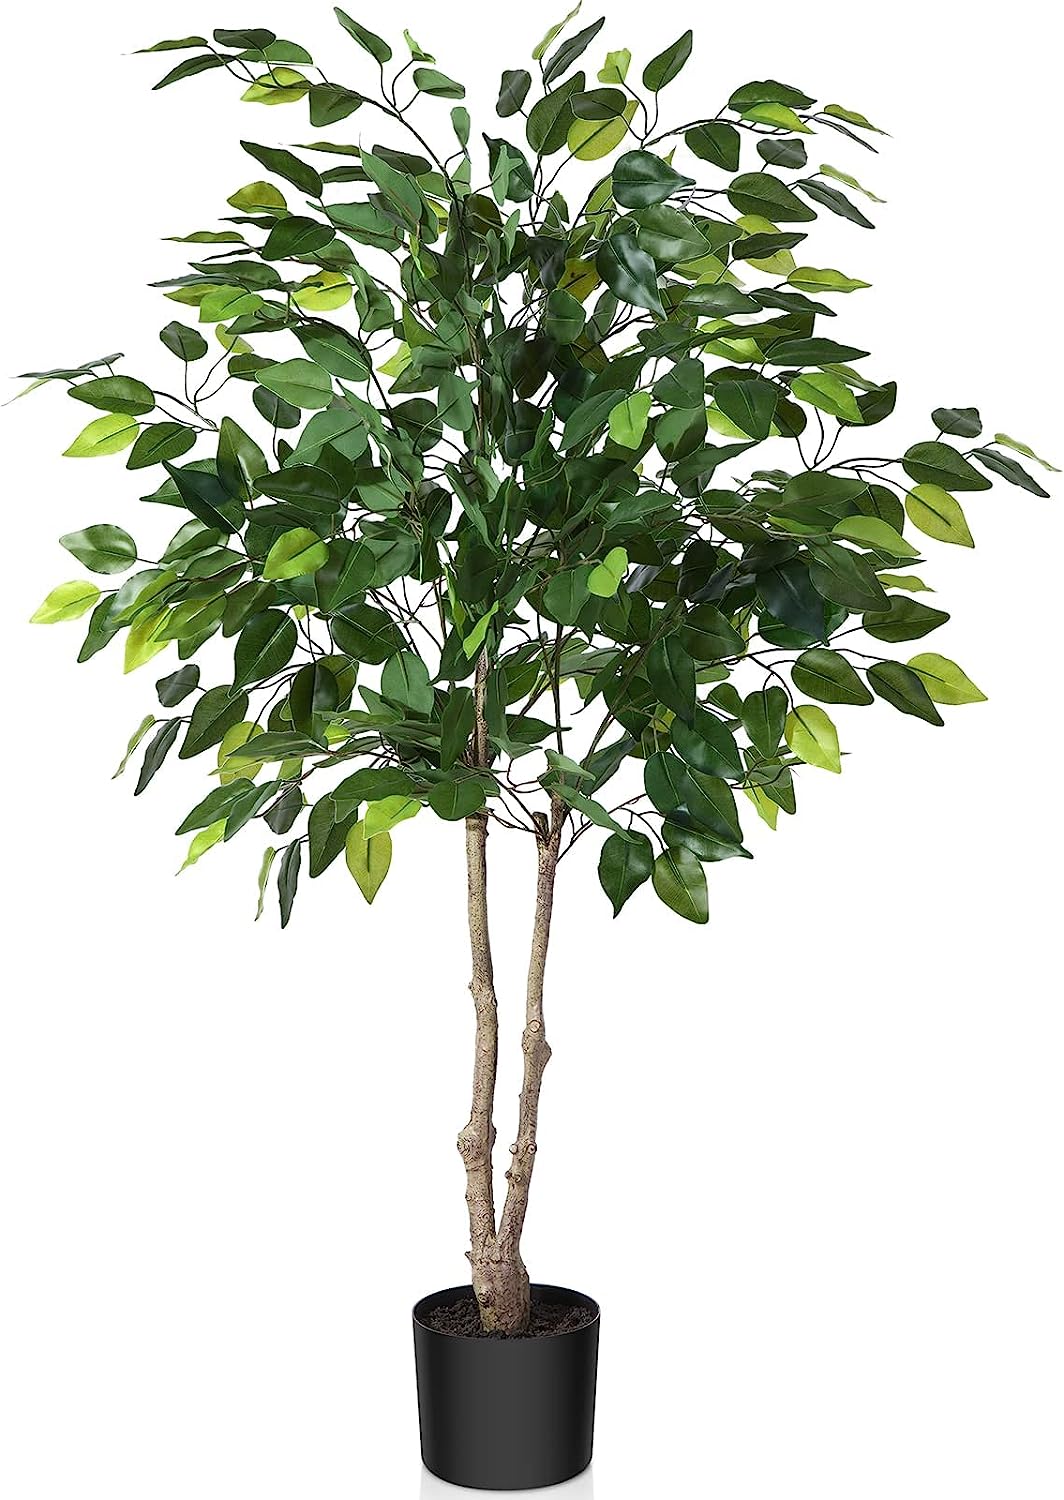 Artificial Ficus Silk Tree, 4FT Faux Plastic Ficus Plant in Pot Graceland Home and Living